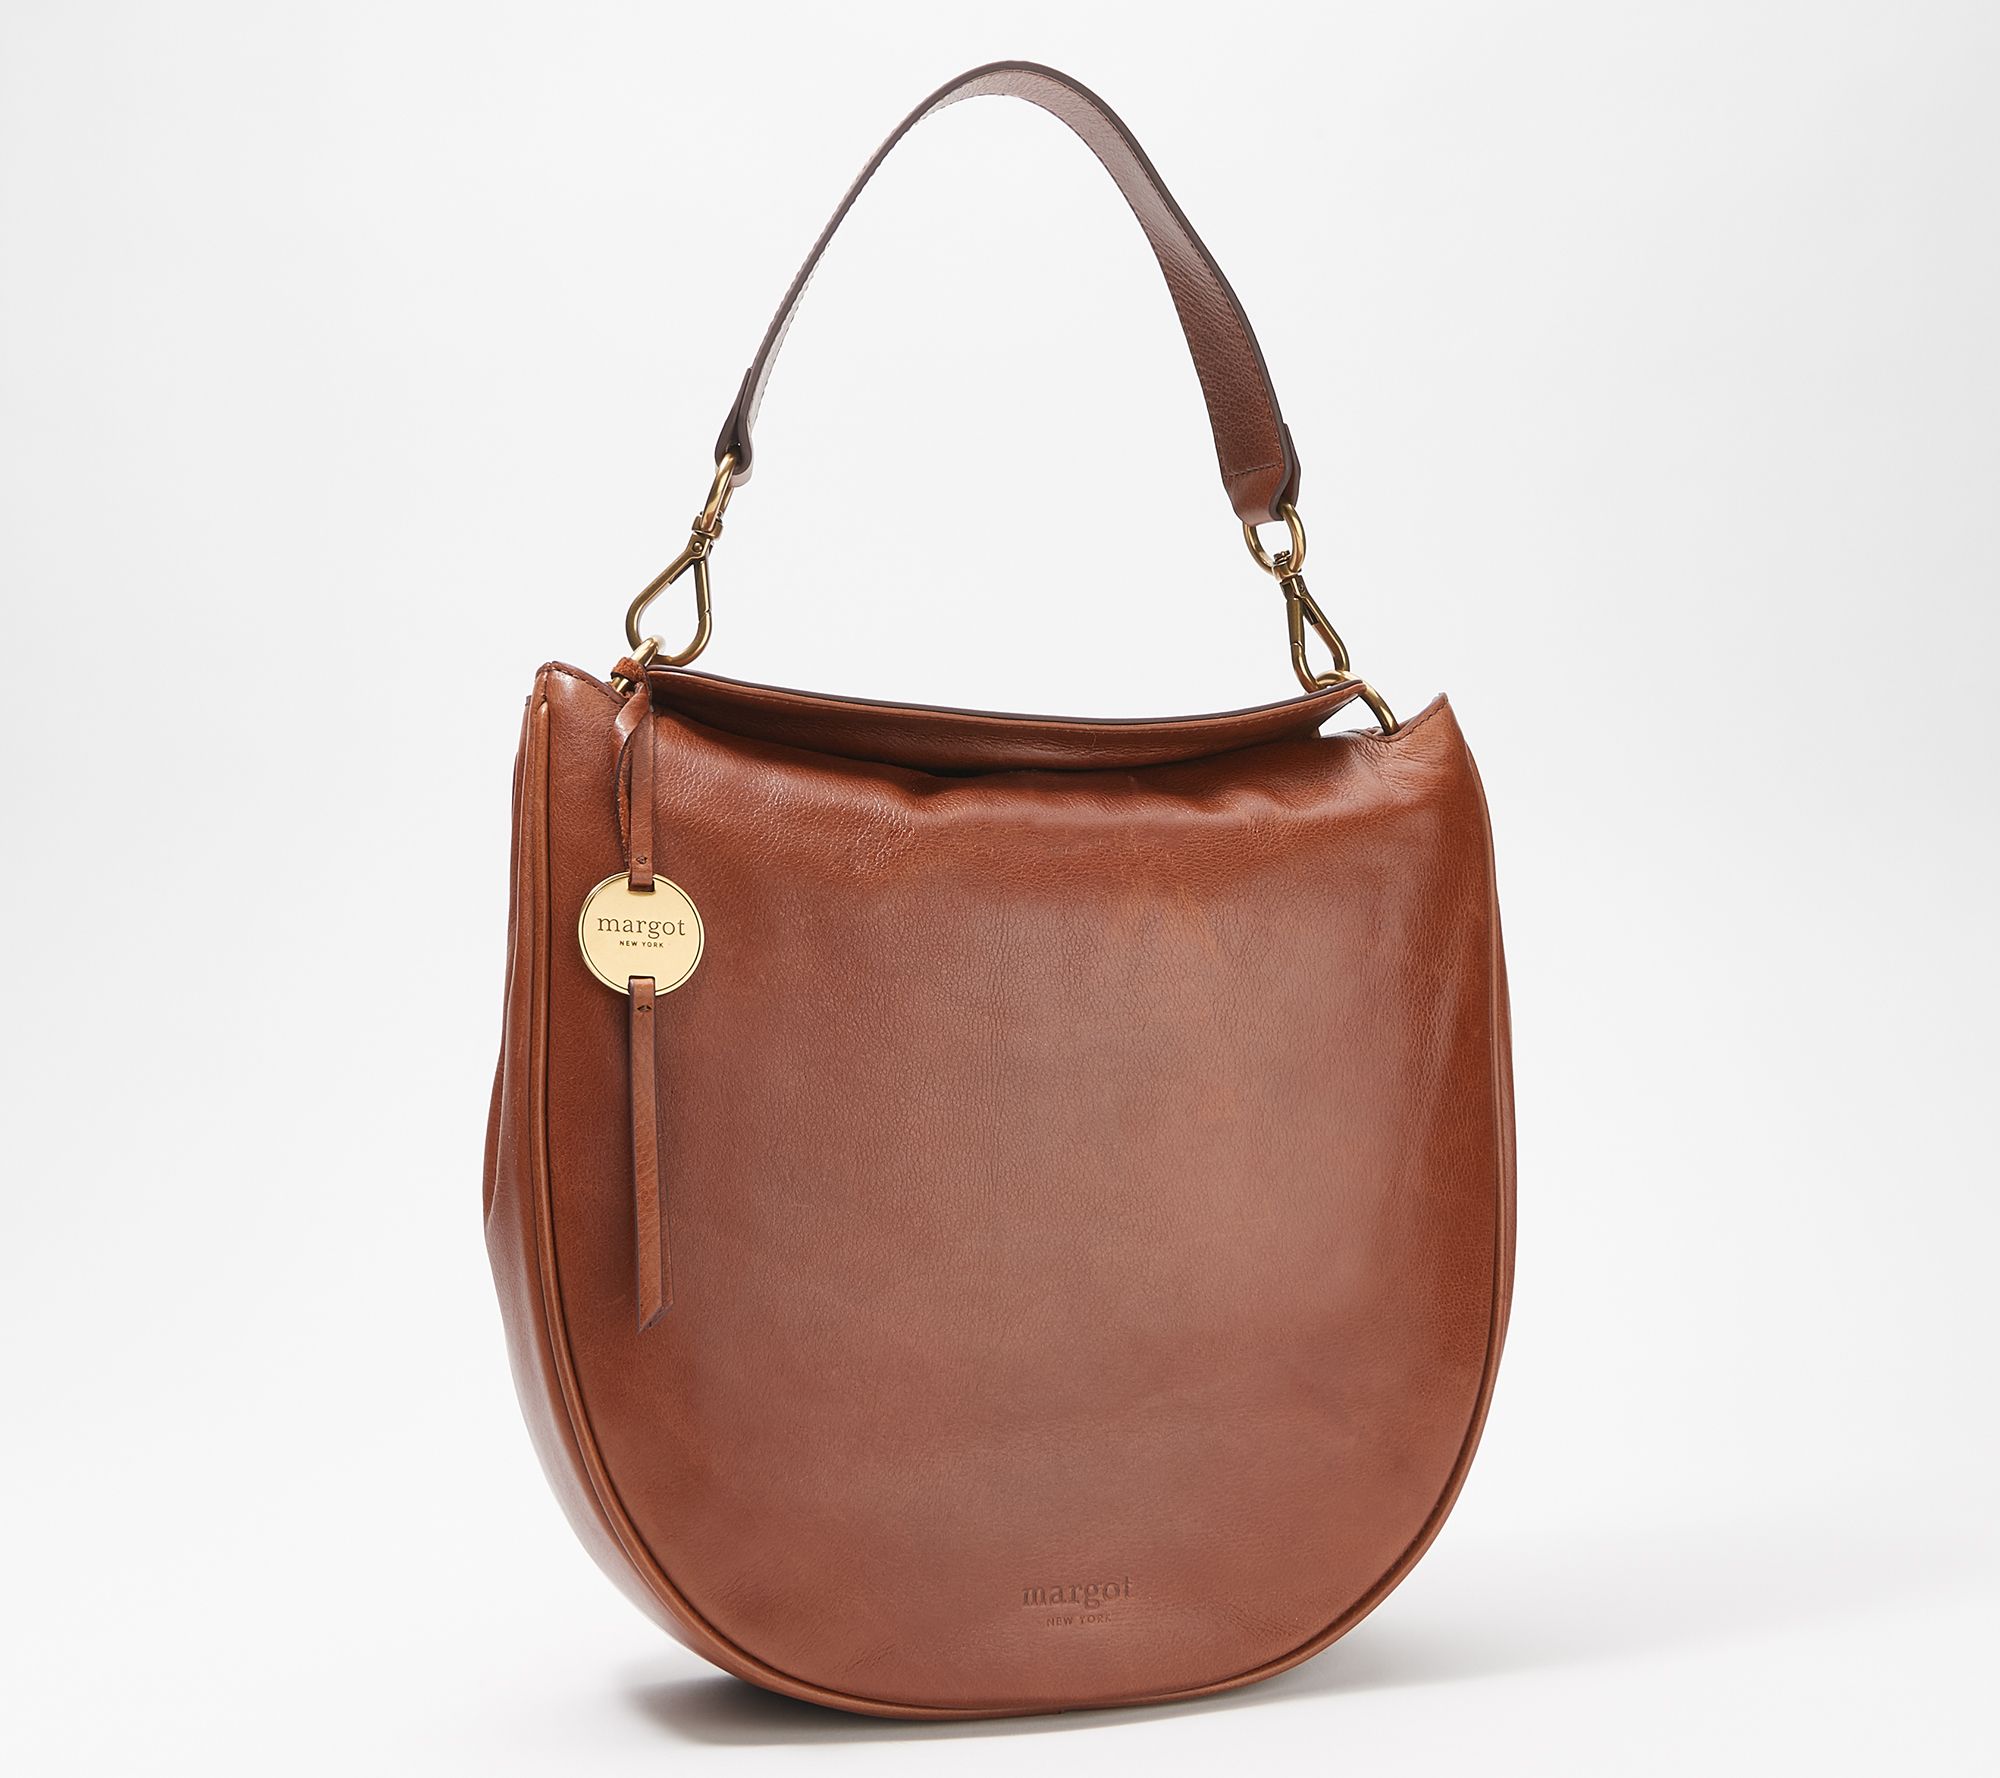 Margot New York Brown Leather Zip Top Crossbody Bag - Same Day Shipping!